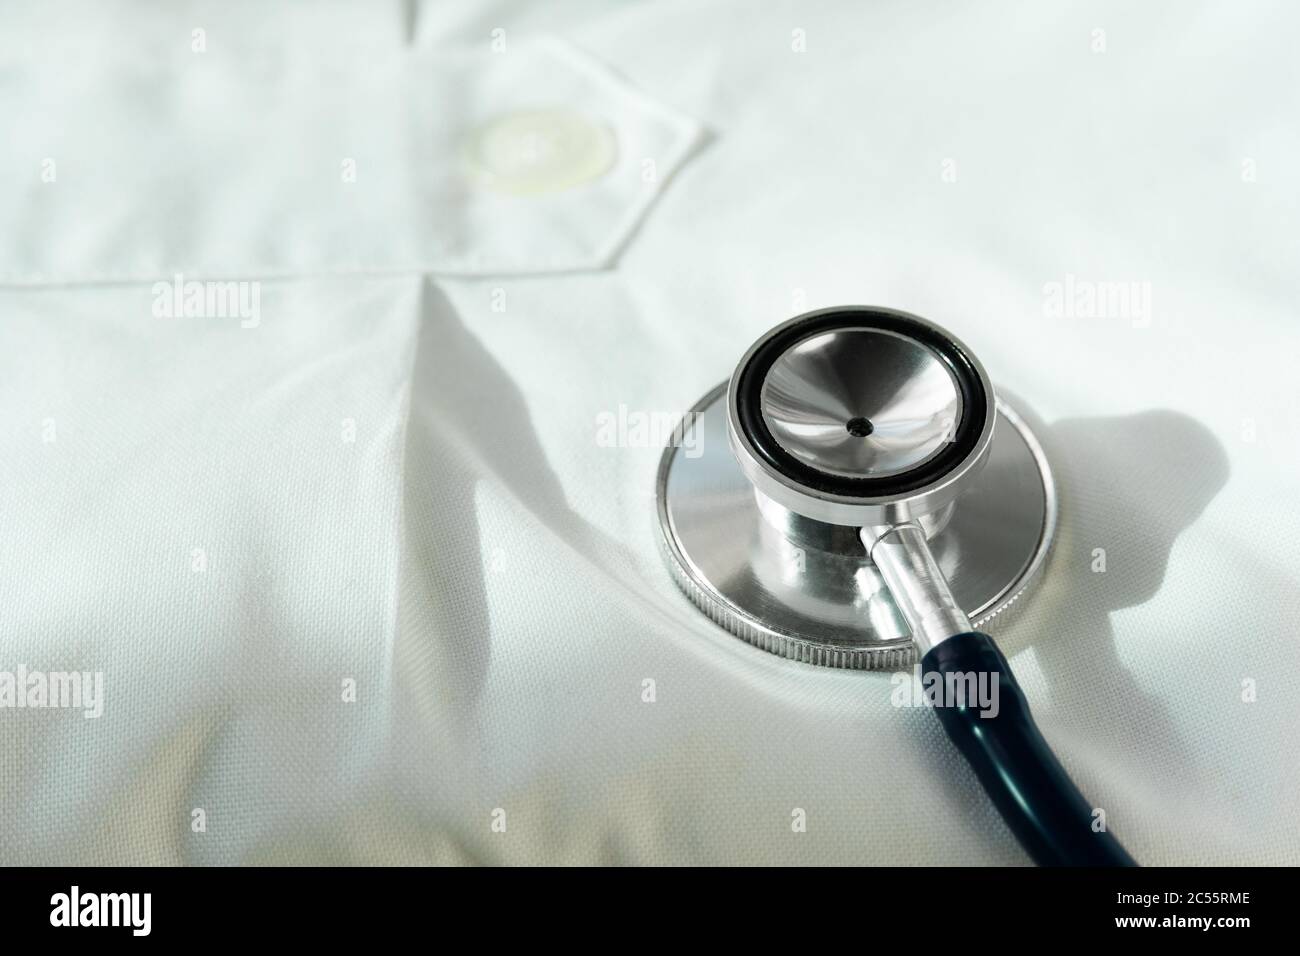 metal stethoscope for medical doctor health diagnosis on white gown suit fabric background Stock Photo